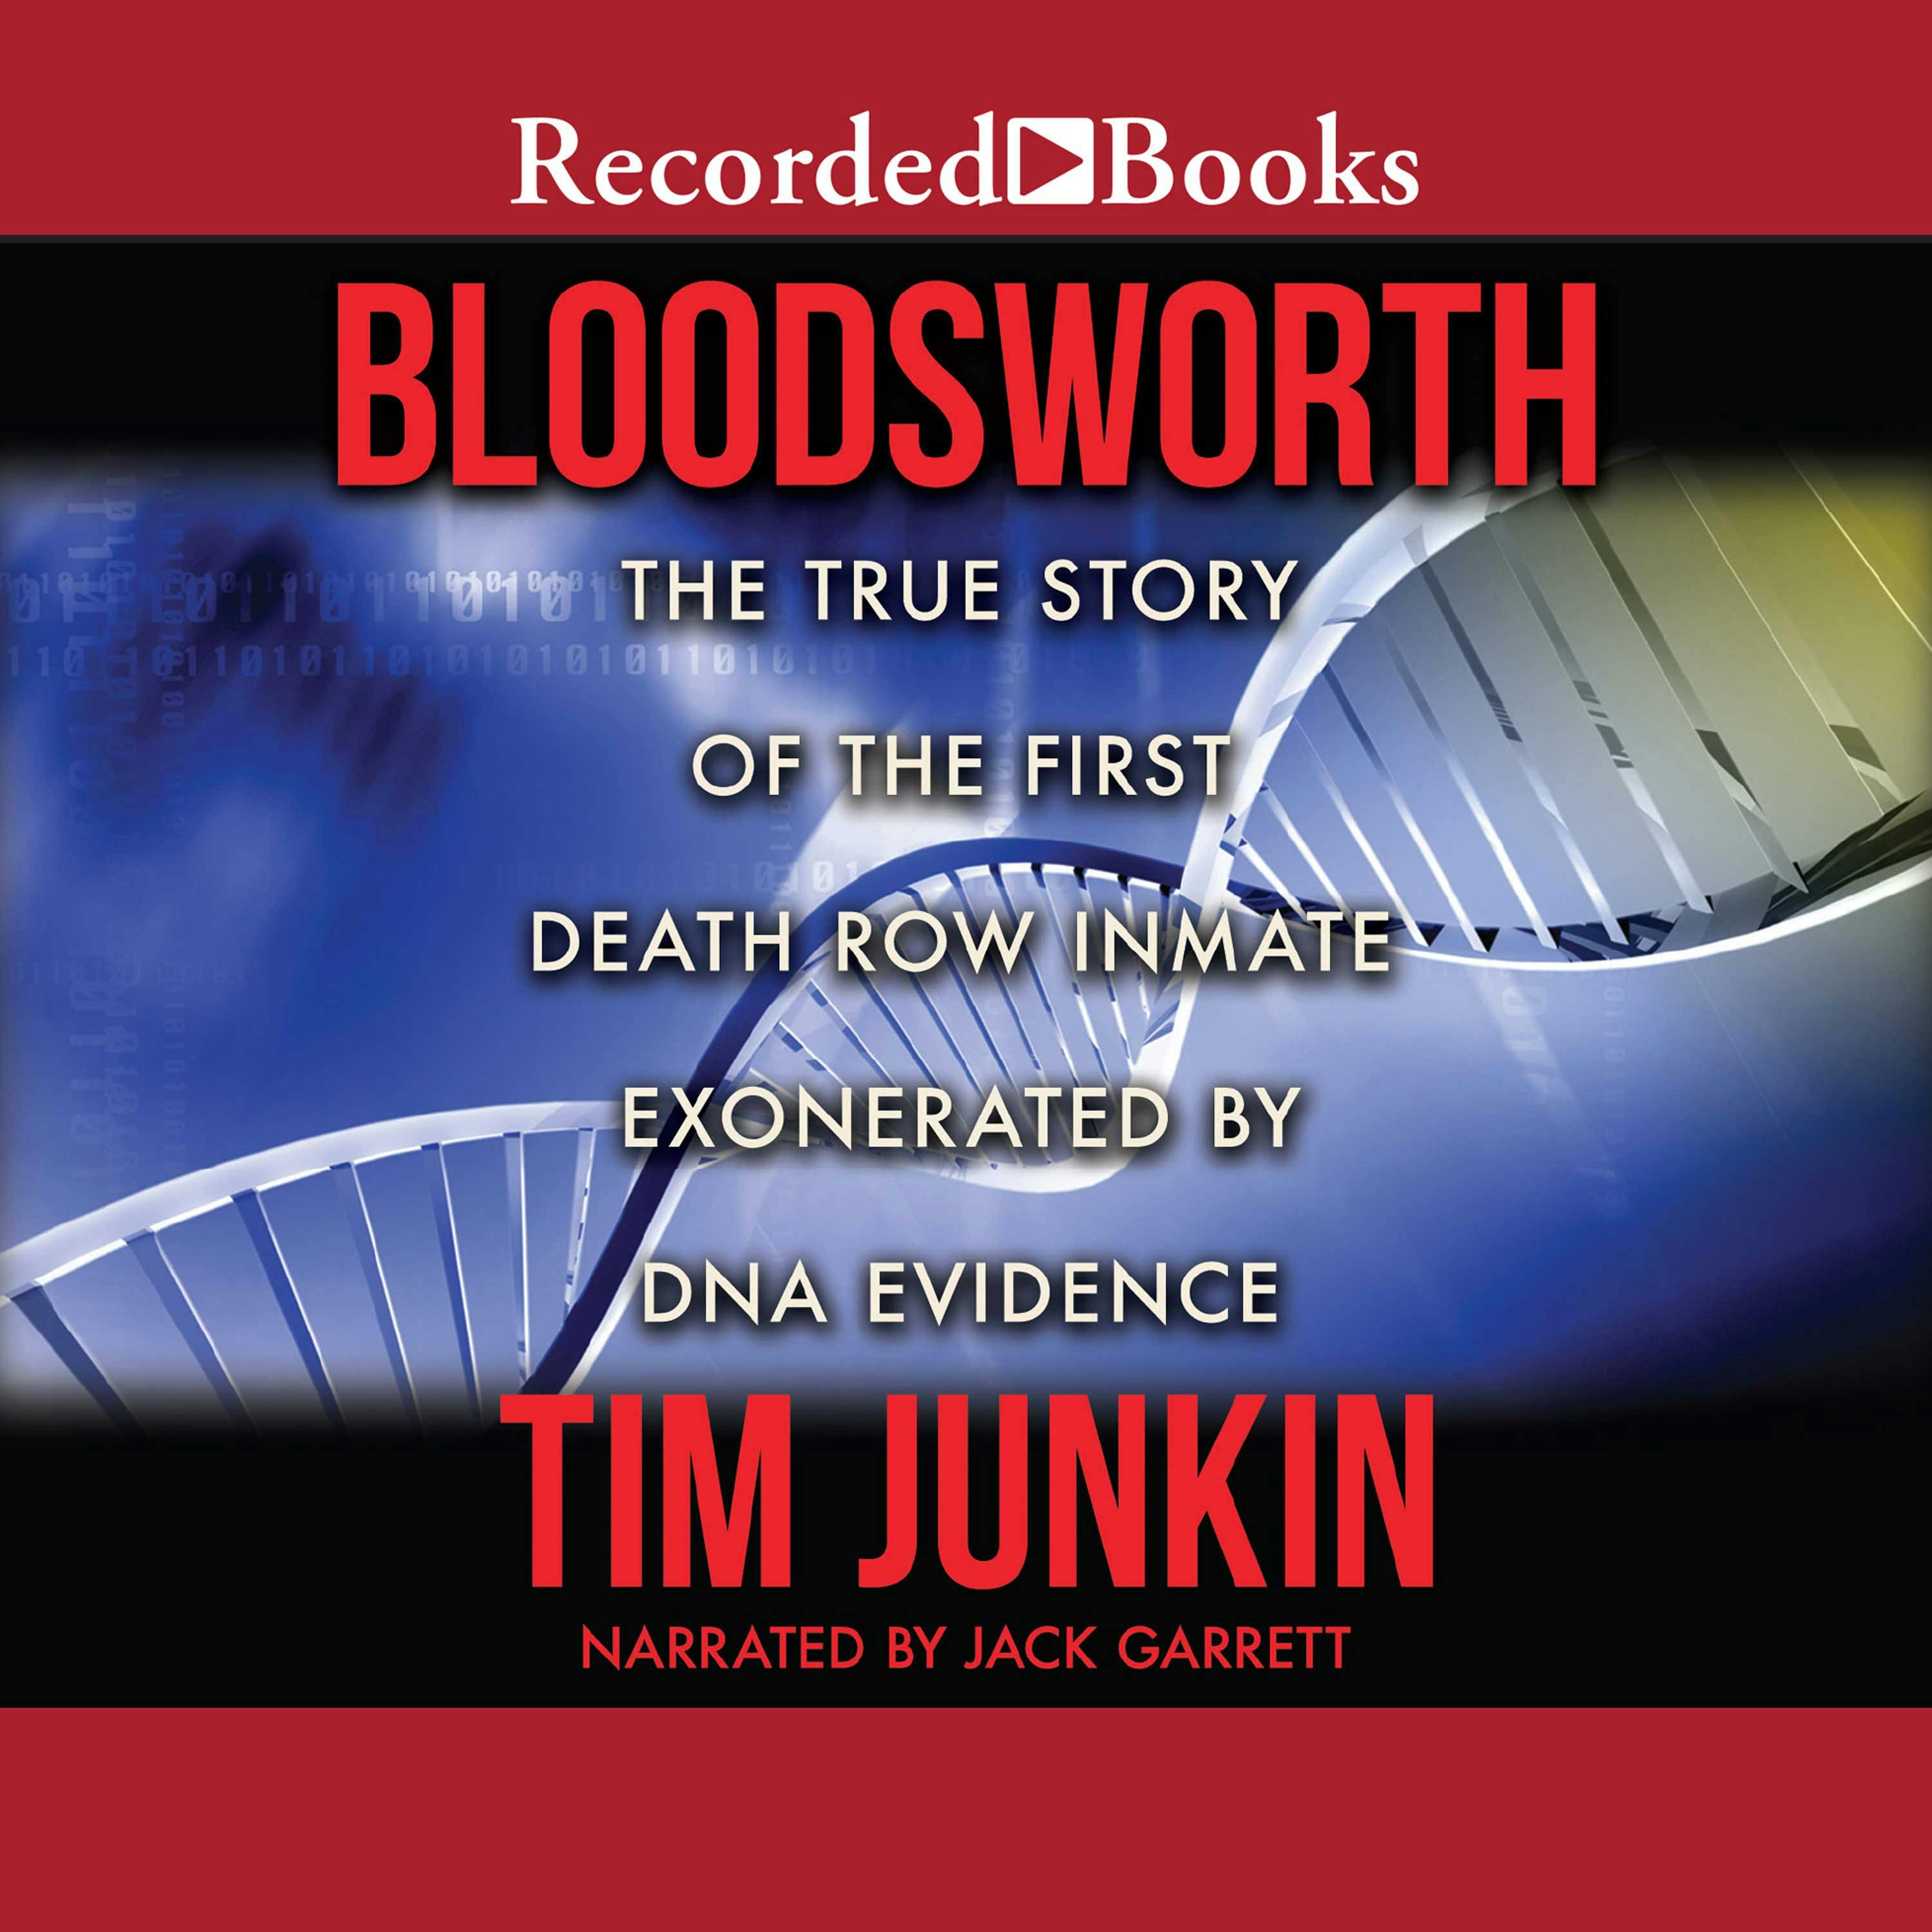 Bloodsworth: The True Story of the First Death Row Inmate Exonerated by DNA Evidence - Tim Junkin